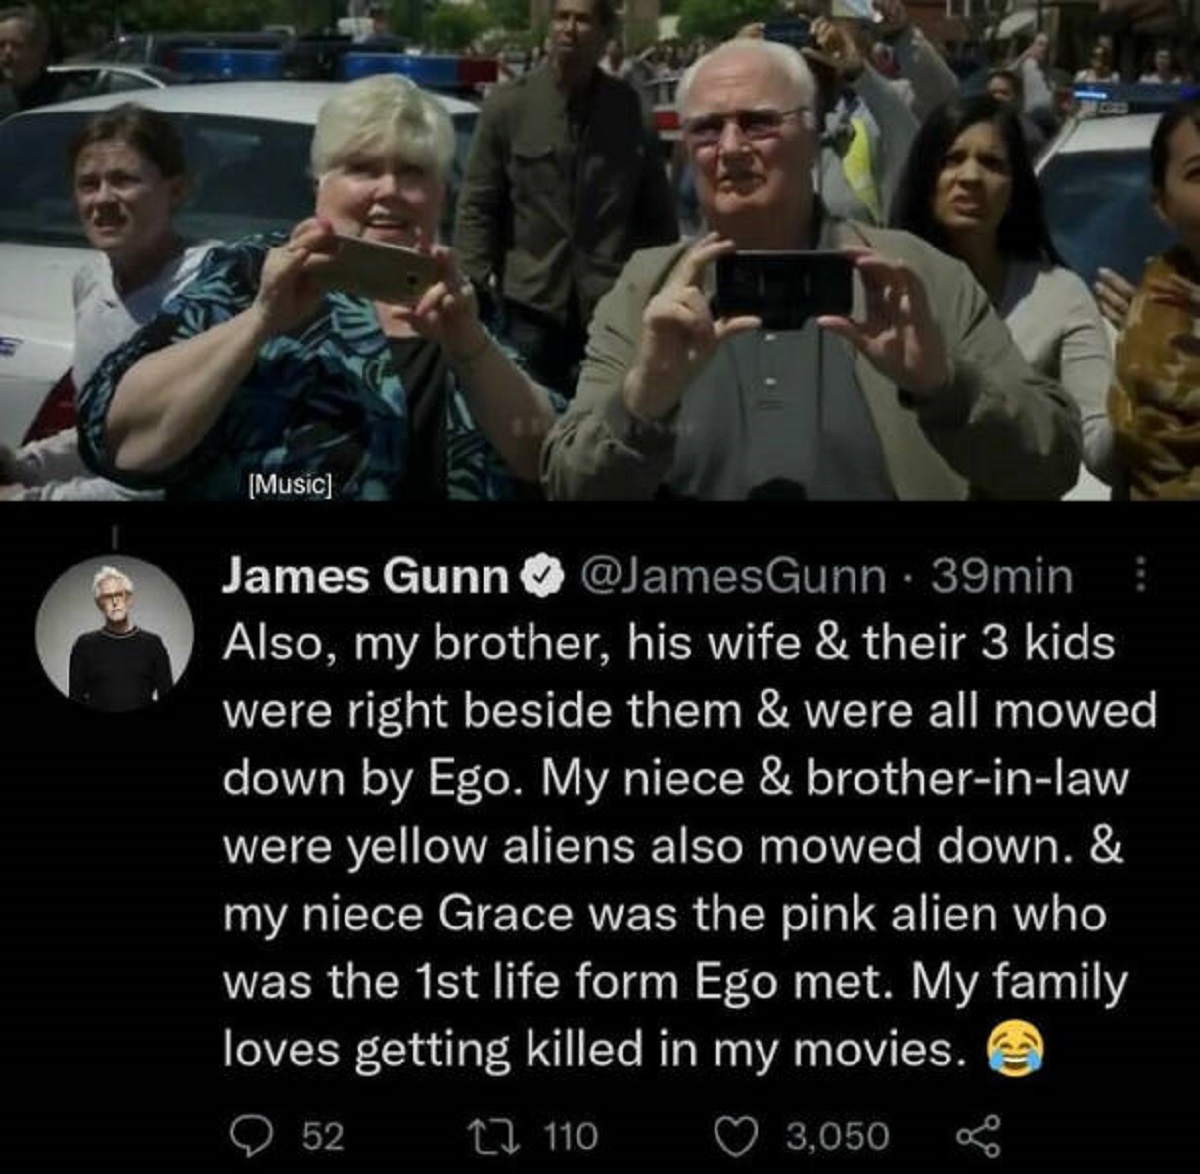 photo caption - Music James Gunn 39min Also, my brother, his wife & their 3 kids were right beside them & were all mowed down by Ego. My niece & brotherinlaw were yellow aliens also mowed down. & my niece Grace was the pink alien who was the 1st life form